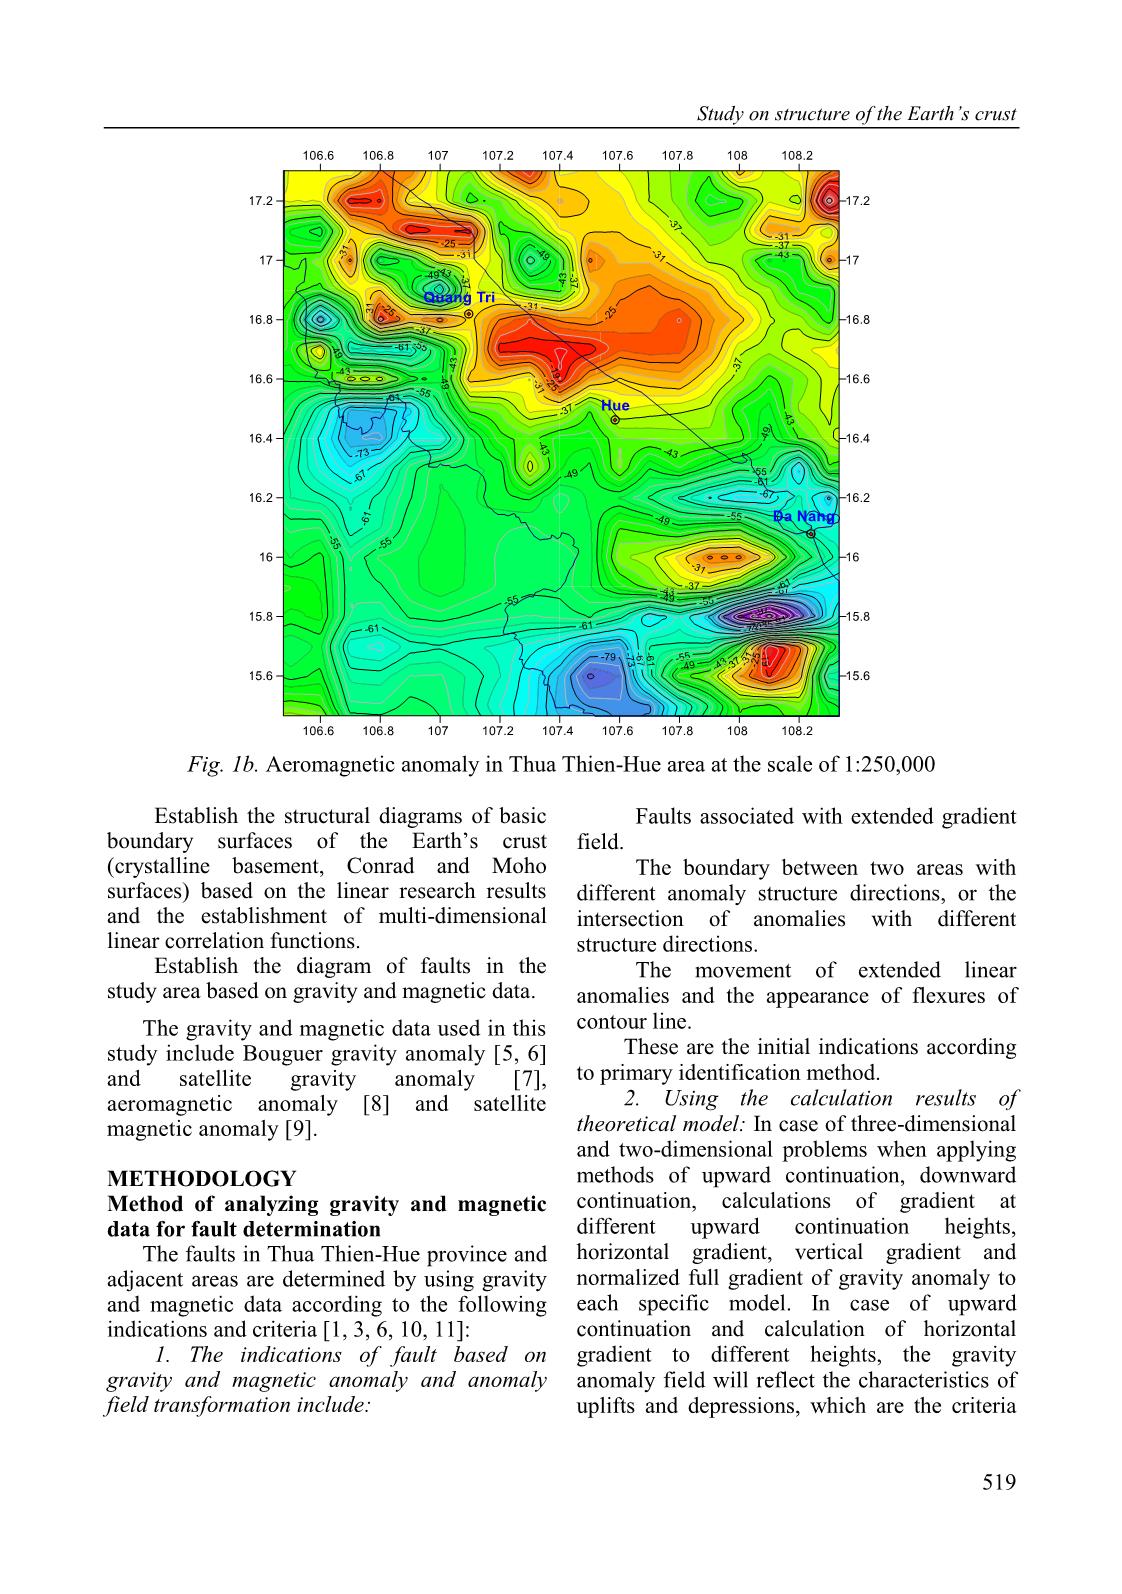 Study on structure of the Earth’s crust in Thua Thien-Hue province and adjacent areas by using gravity and magnetic data in combination trang 3